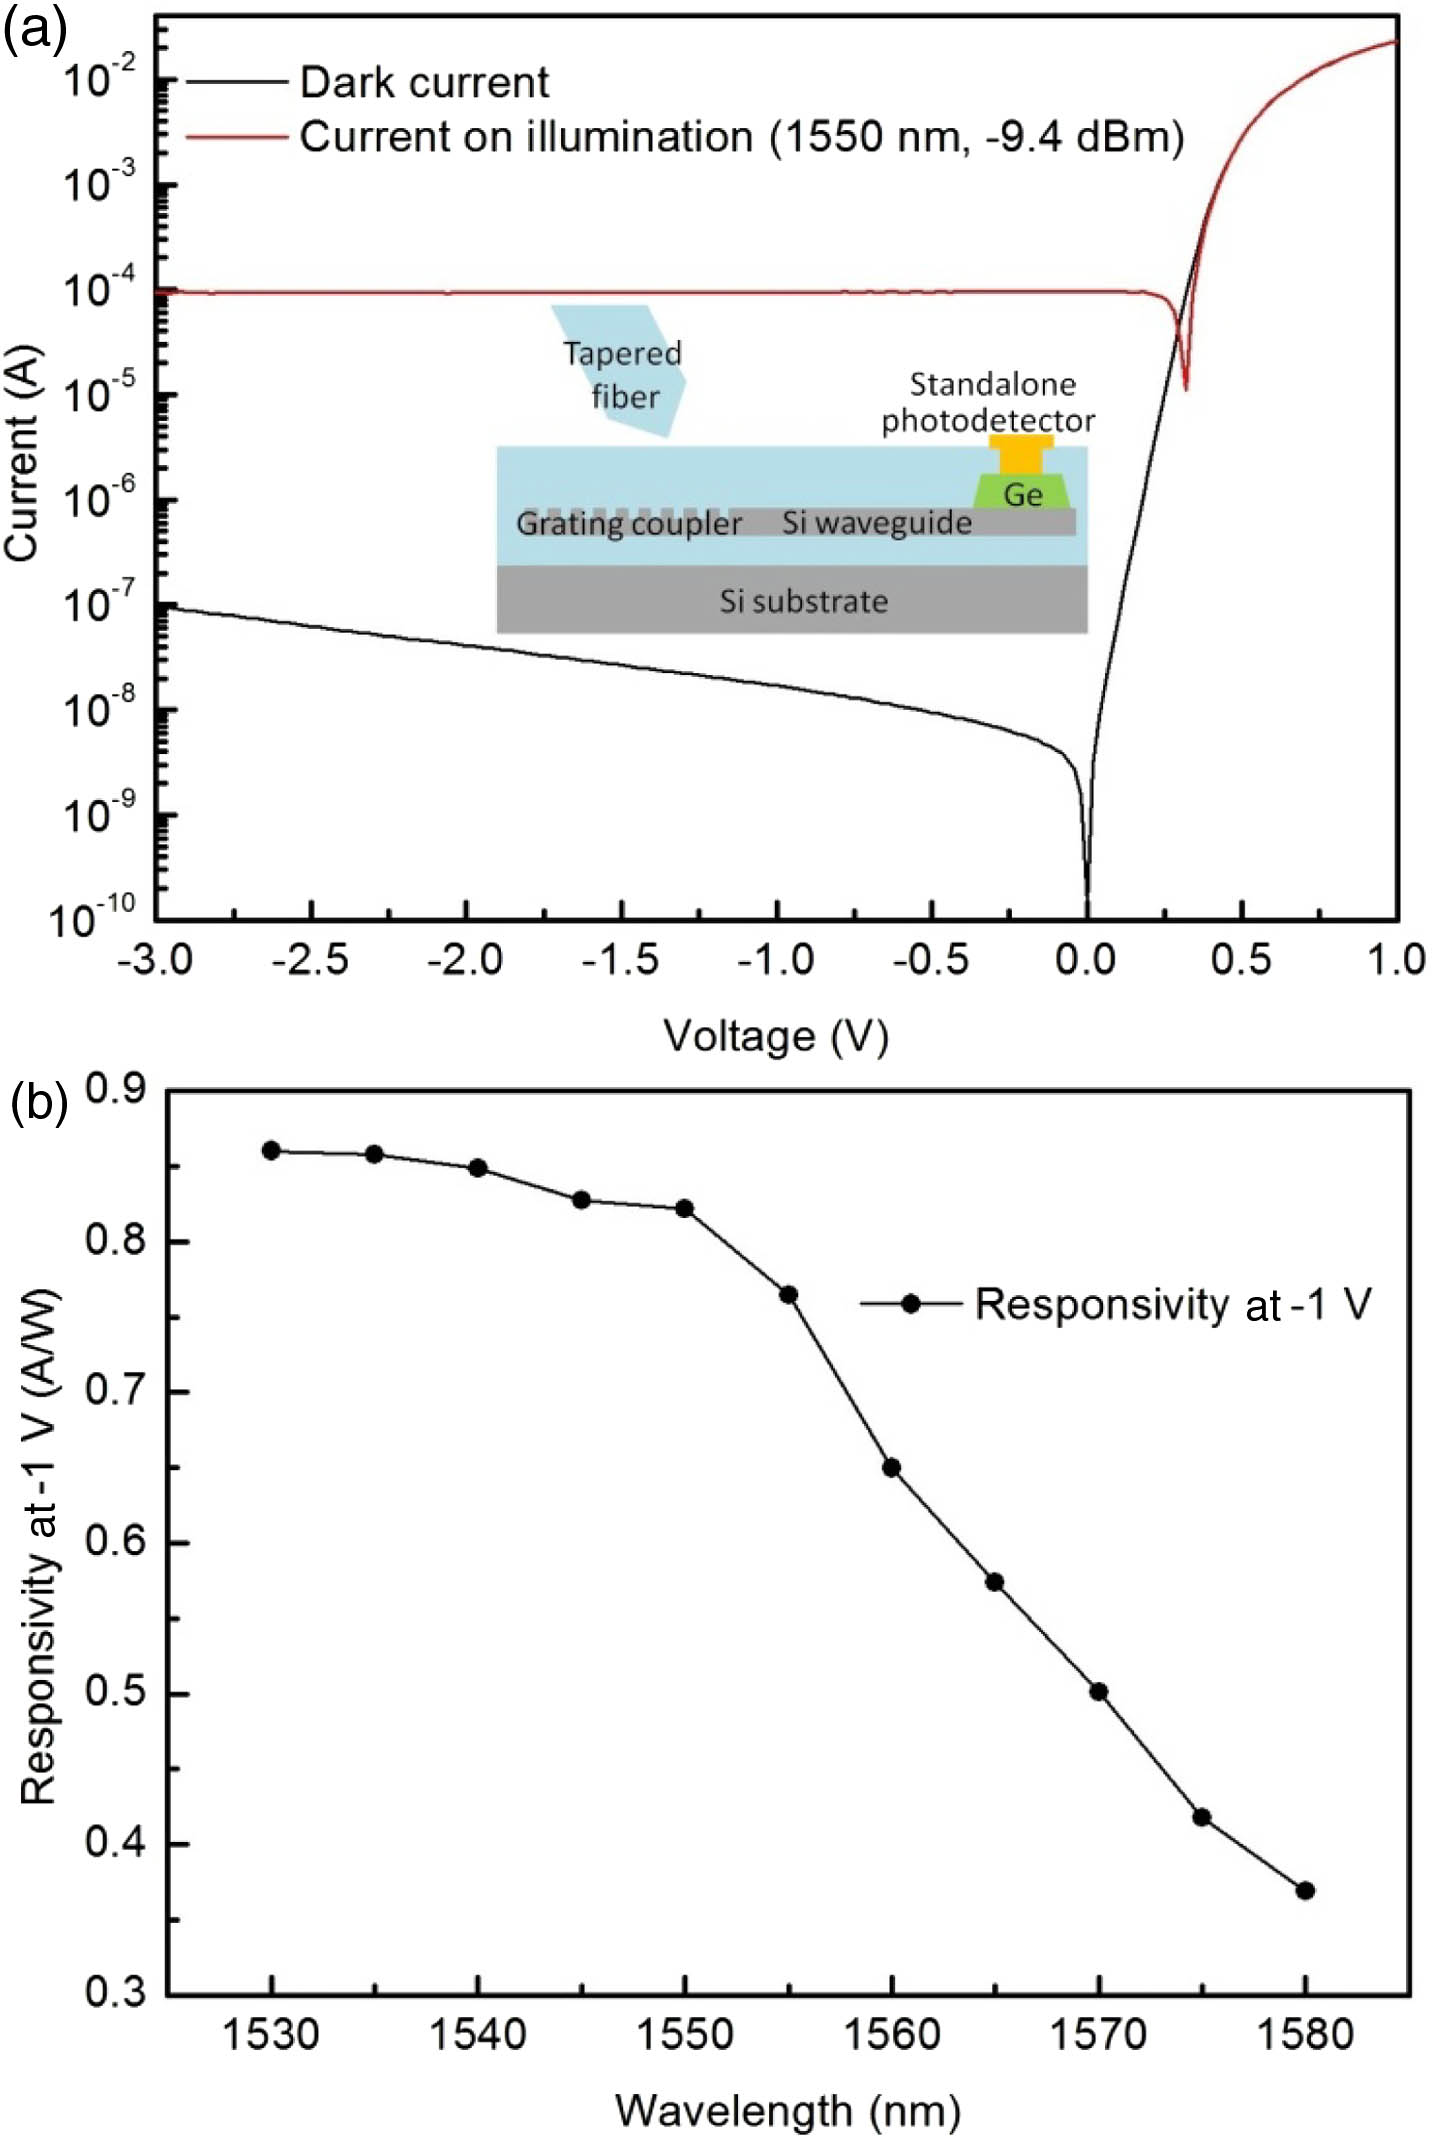 (a) Typical I-V curves of the standalone photodetector with/without light incidence (1550 nm) from 1 V to −3 V. The optical power entering the photodetector is about −9.4 dBm. The inset is a schematic of the optical coupling in this measurement. (b) Spectral responsivity of the standalone photodetector from 1530 to 1580 nm under −1 V.